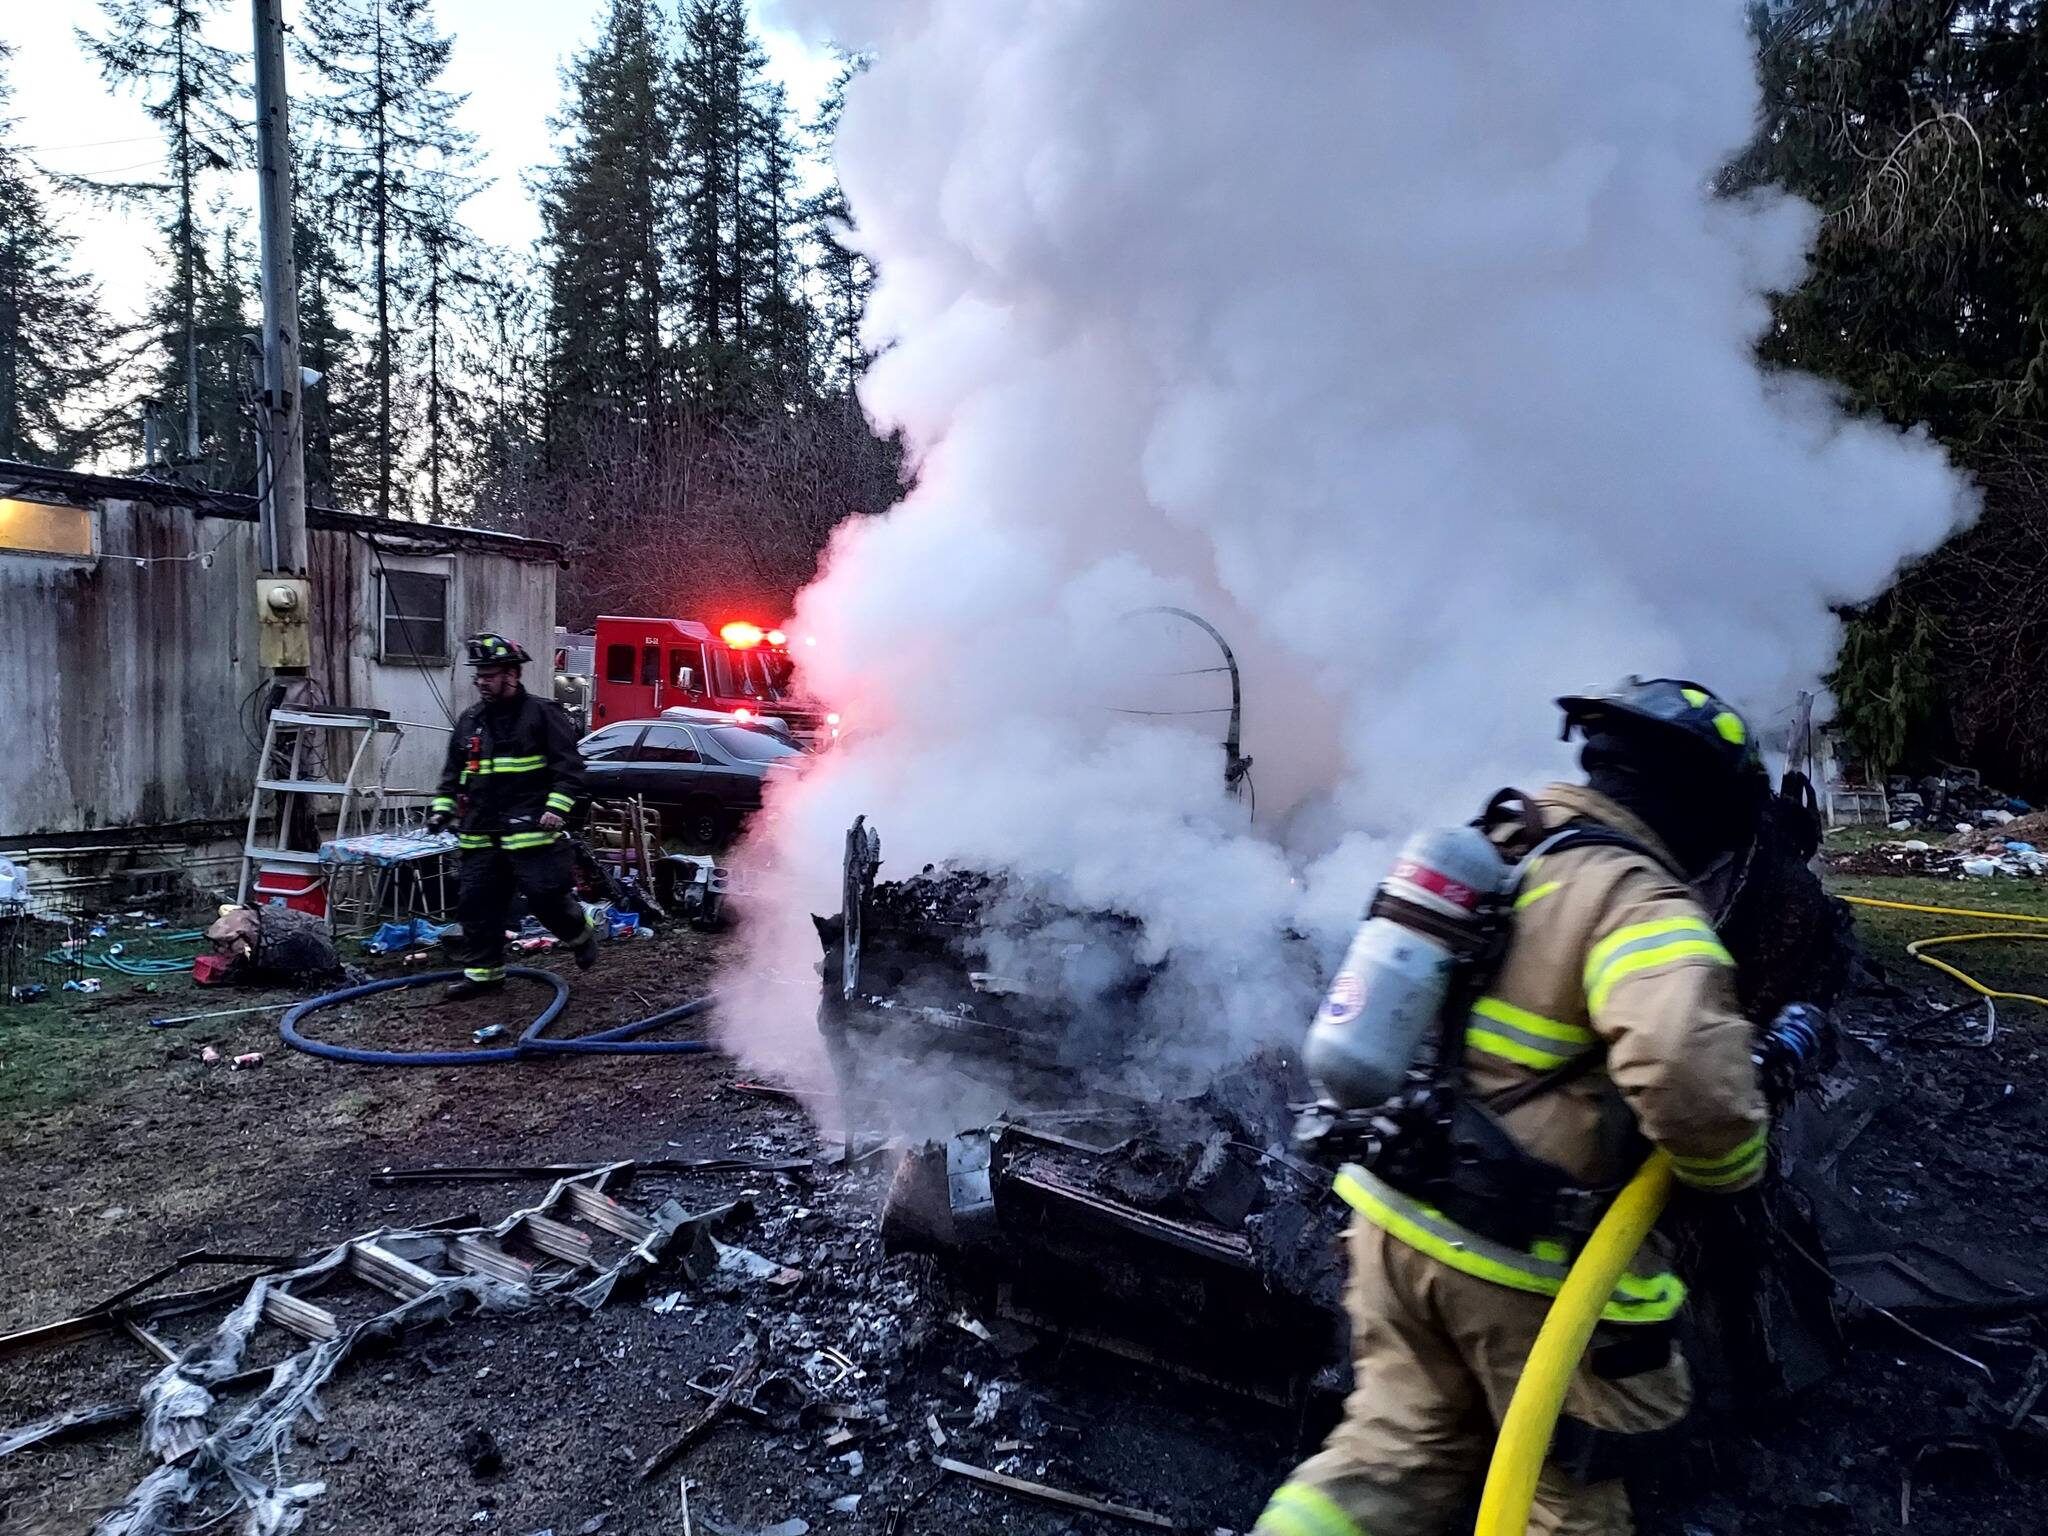 Firefighters from East Grays Harbor Fire & Rescue, Oakville and McCleary tackled an RV fire on Highway 12 on Sunday afternoon. (Courtesy photo / EGHFR)